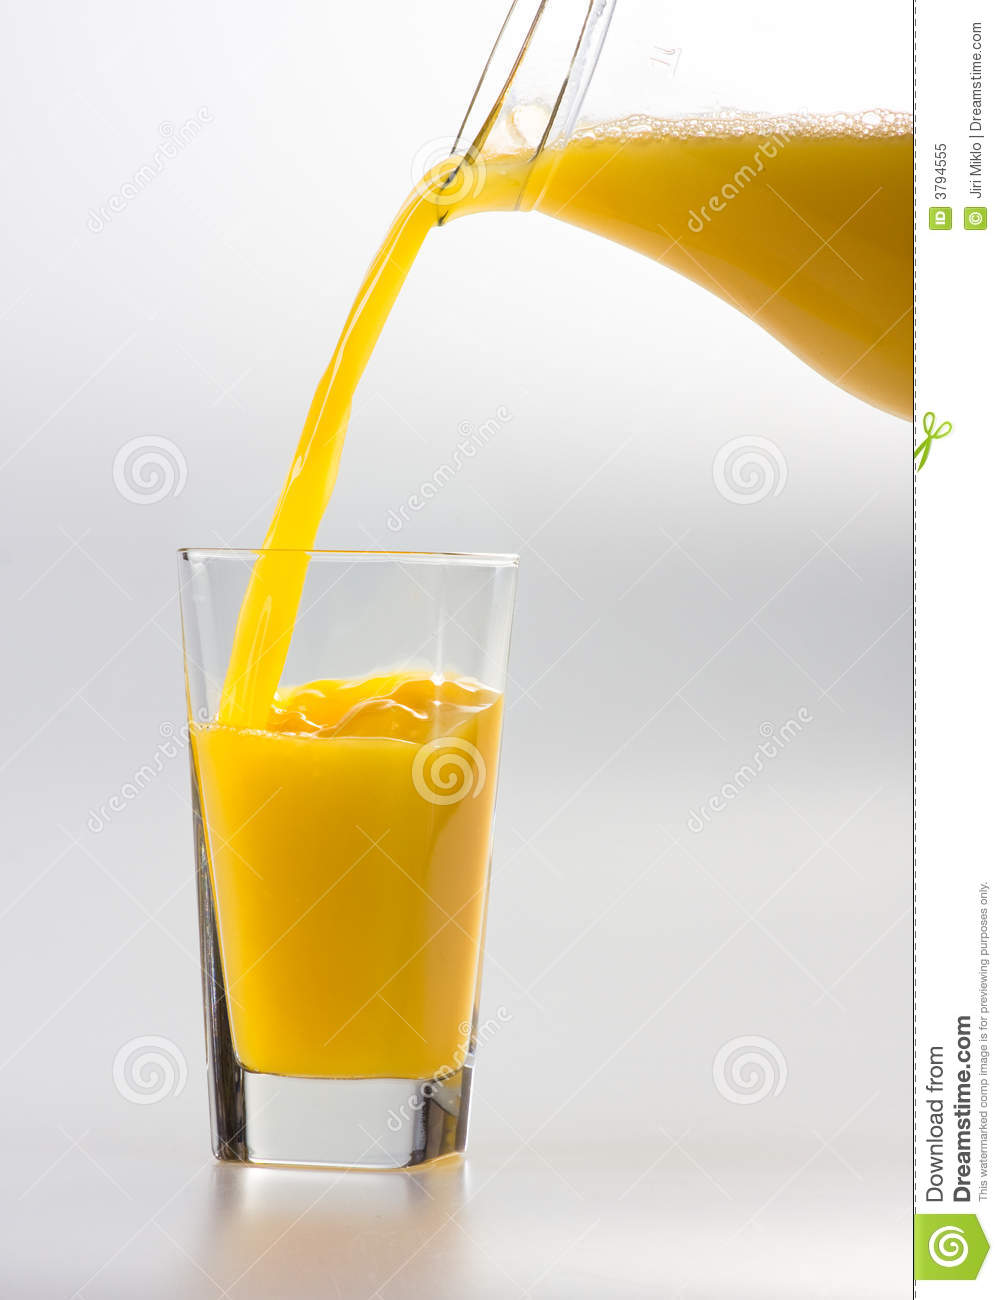 Juice To Pour From Pitcher Royalty Free Stock Photo   Image  3794555